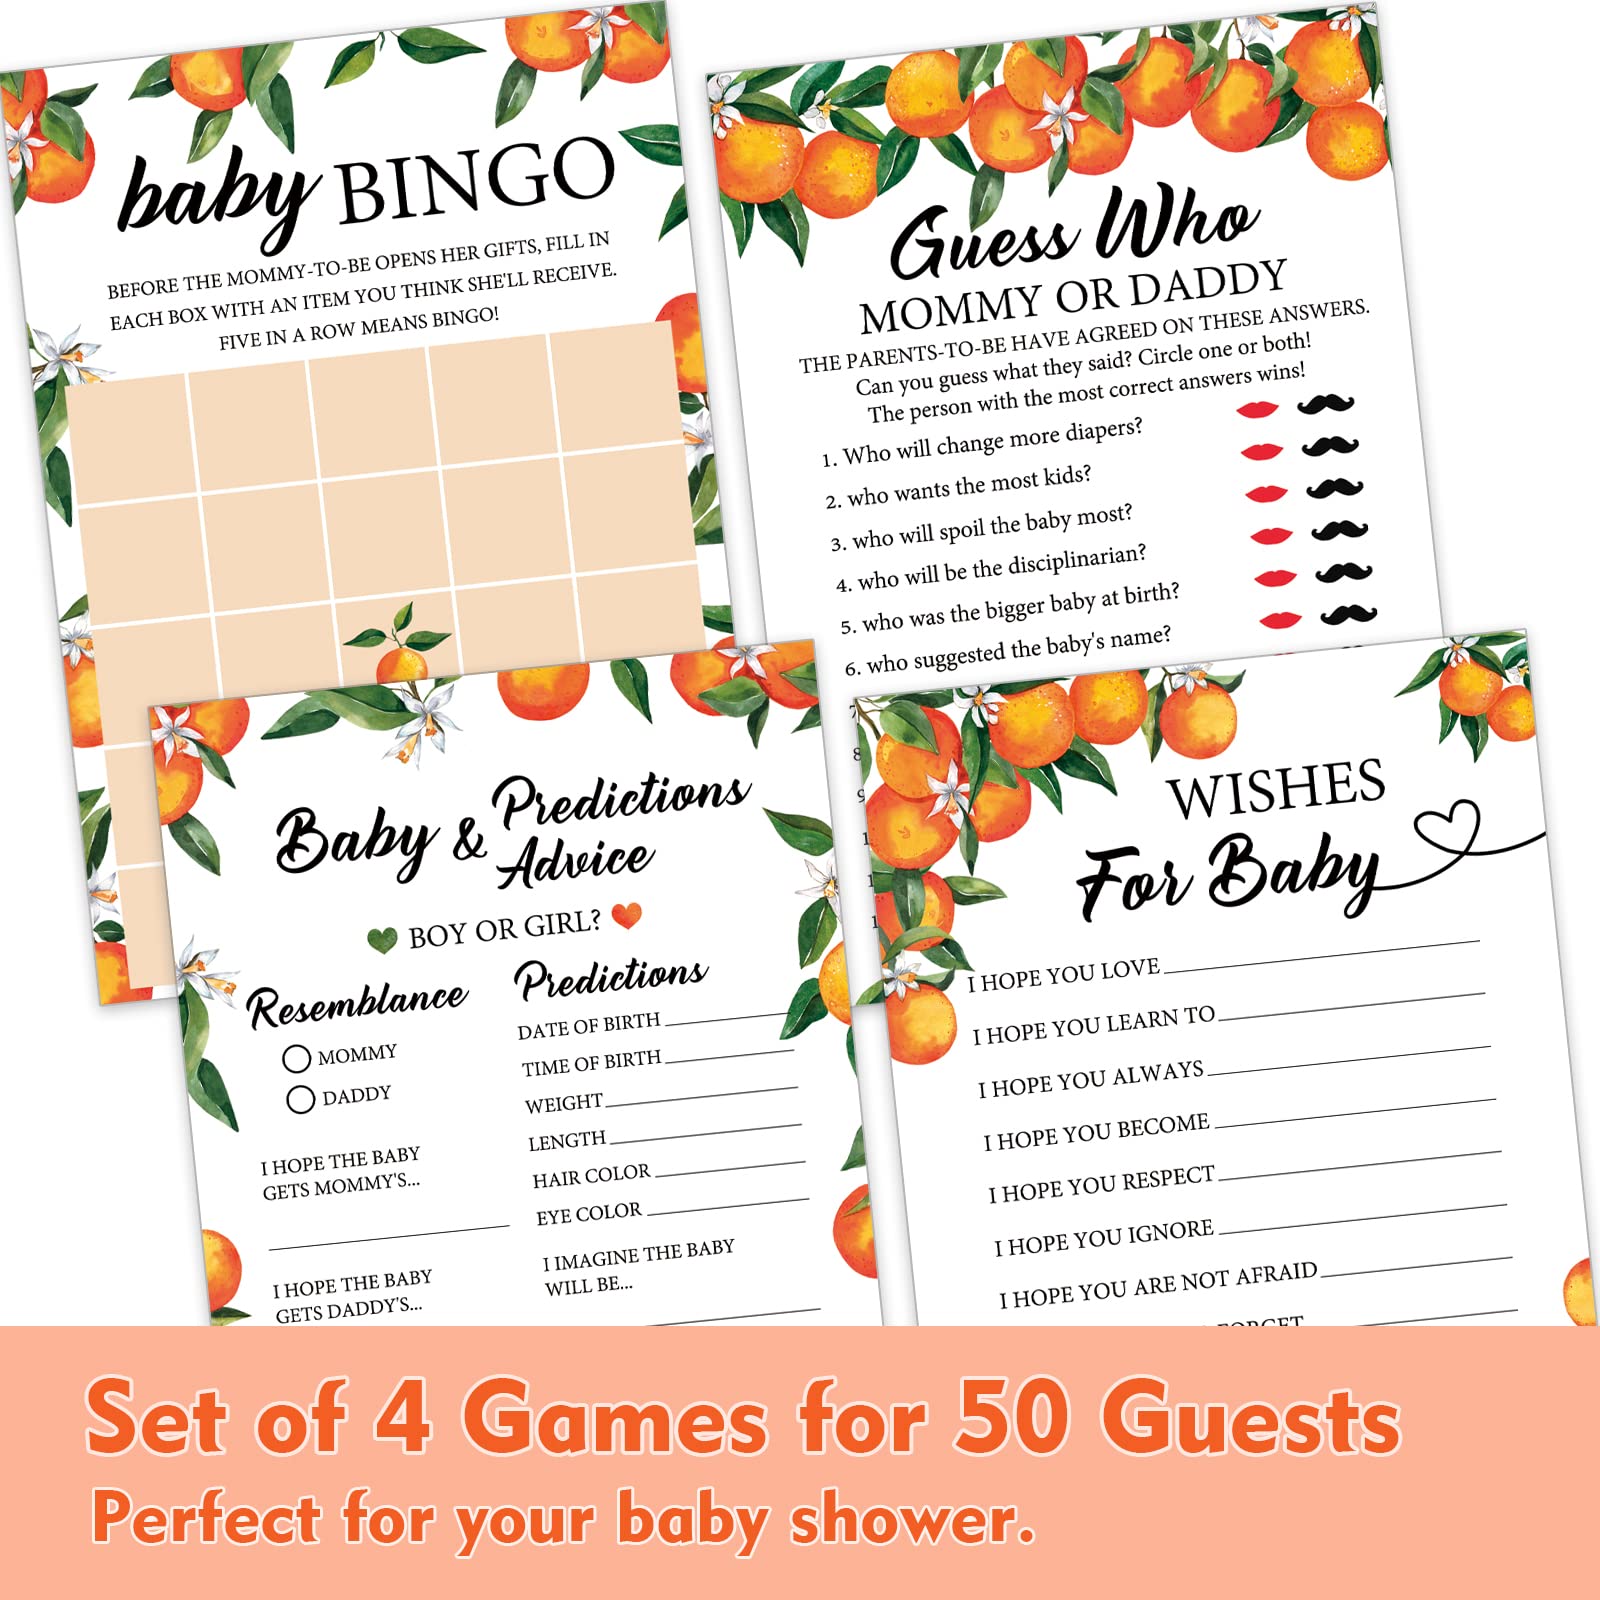 Little Cutie Orange Baby Shower Games, 4 Neutral Games, 50 Sheets Each, Fun Baby Shower Games Activities, Includes Bingo, Baby Prediction and Advice, Wishes for Baby, and Guess Who Mommy or Daddy